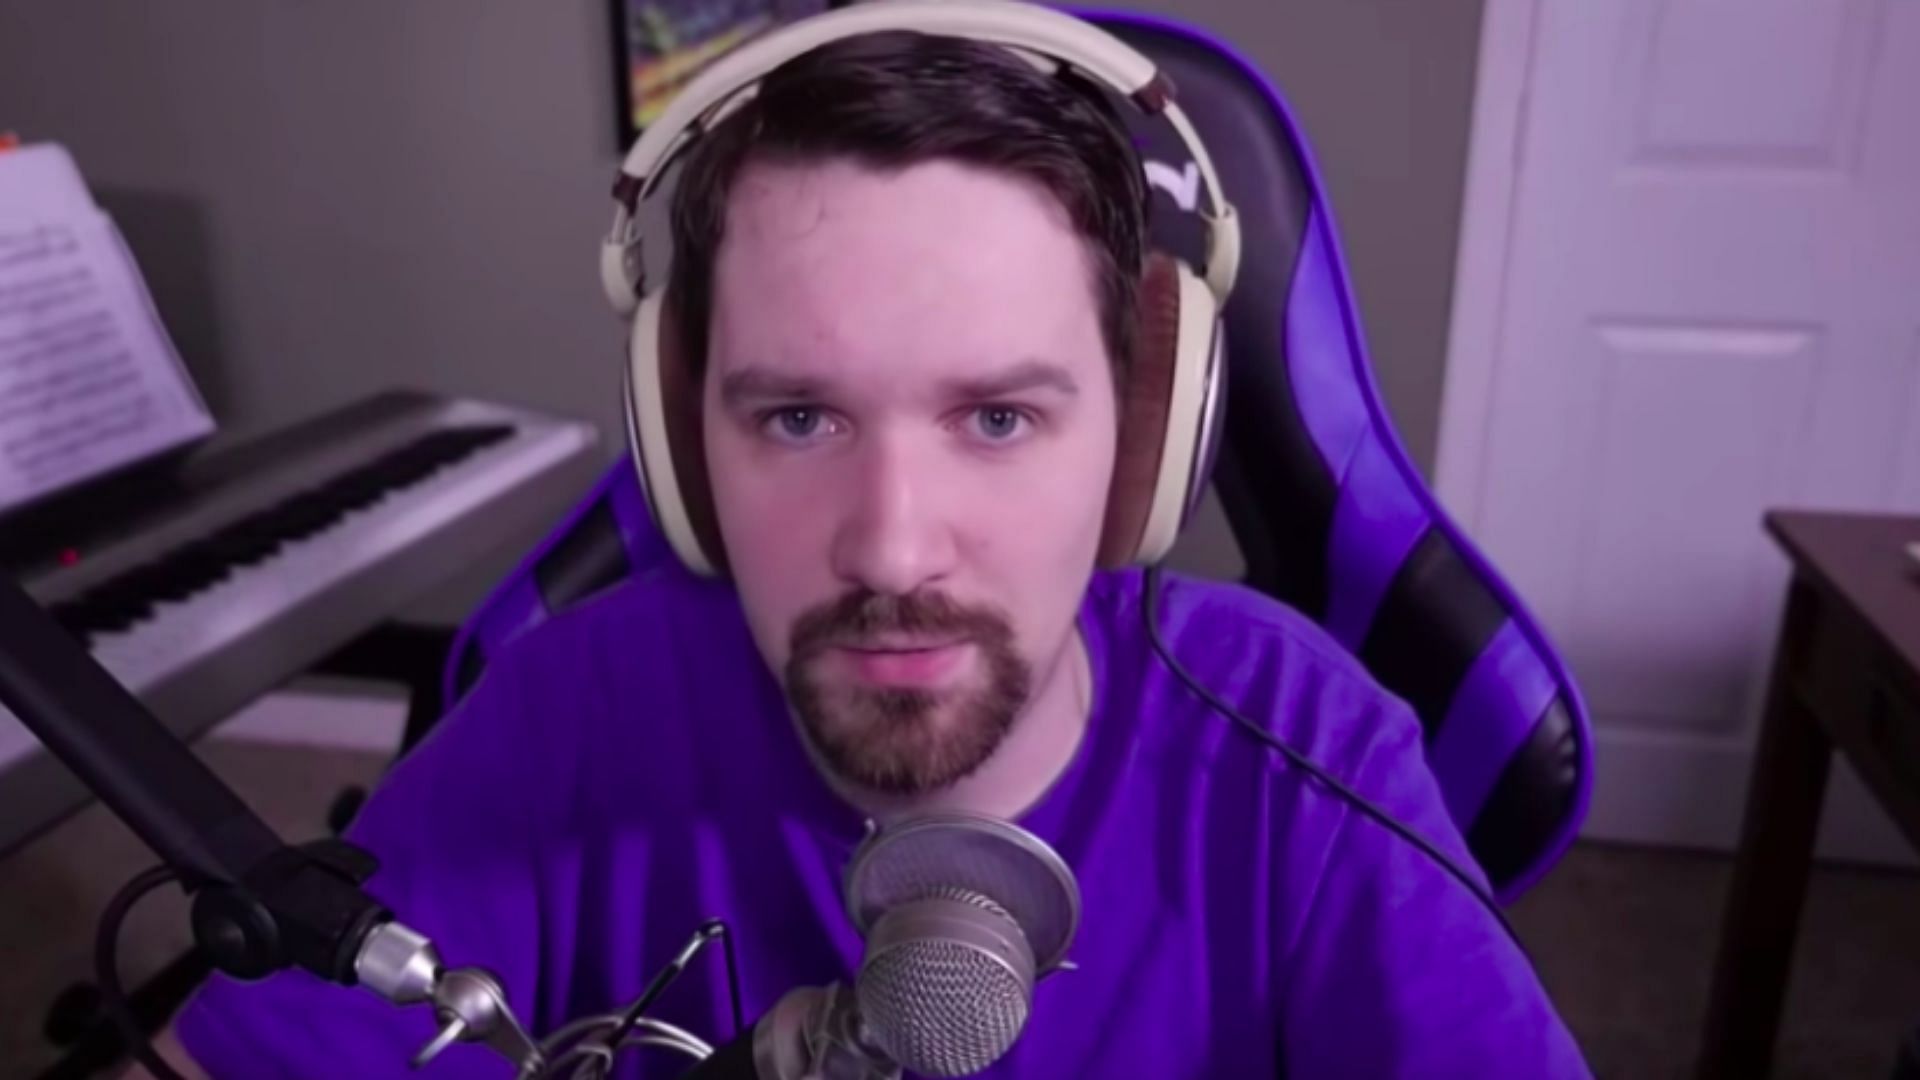 Twitch streamer Destiny called out for hypocrisy after promoting NFTs (Image via Know Your Meme)